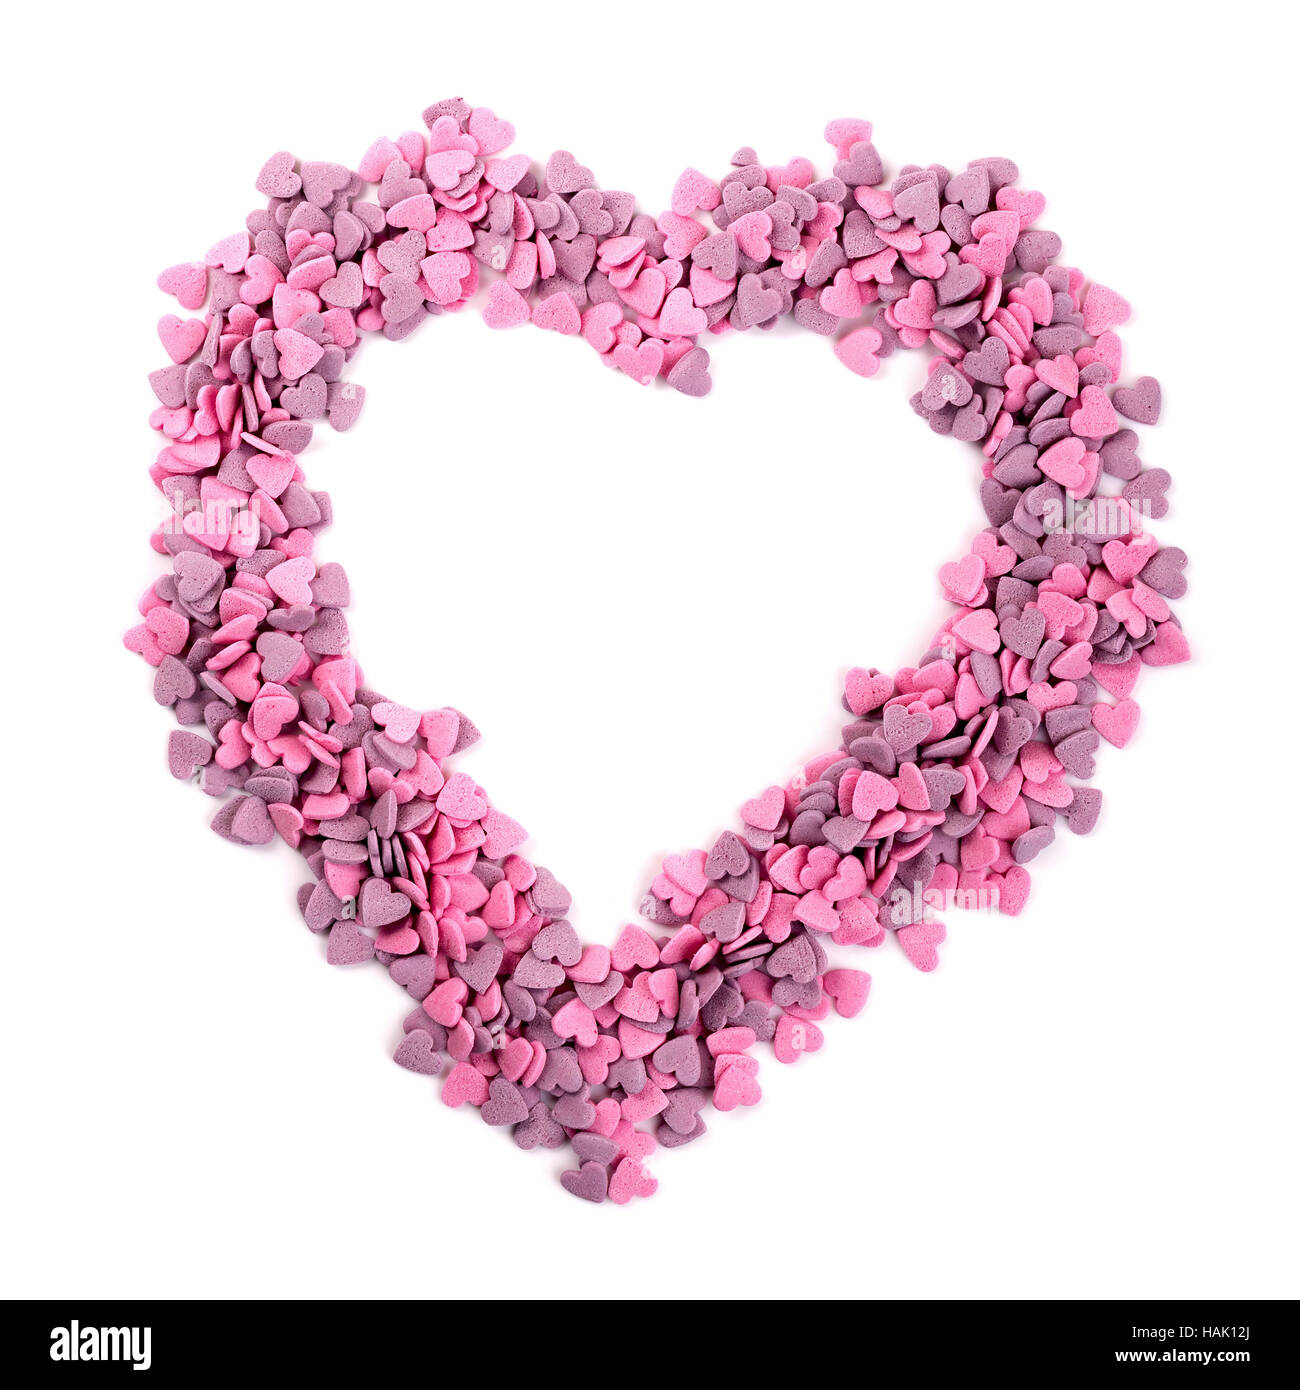 heart shape, made of small candies Stock Photo